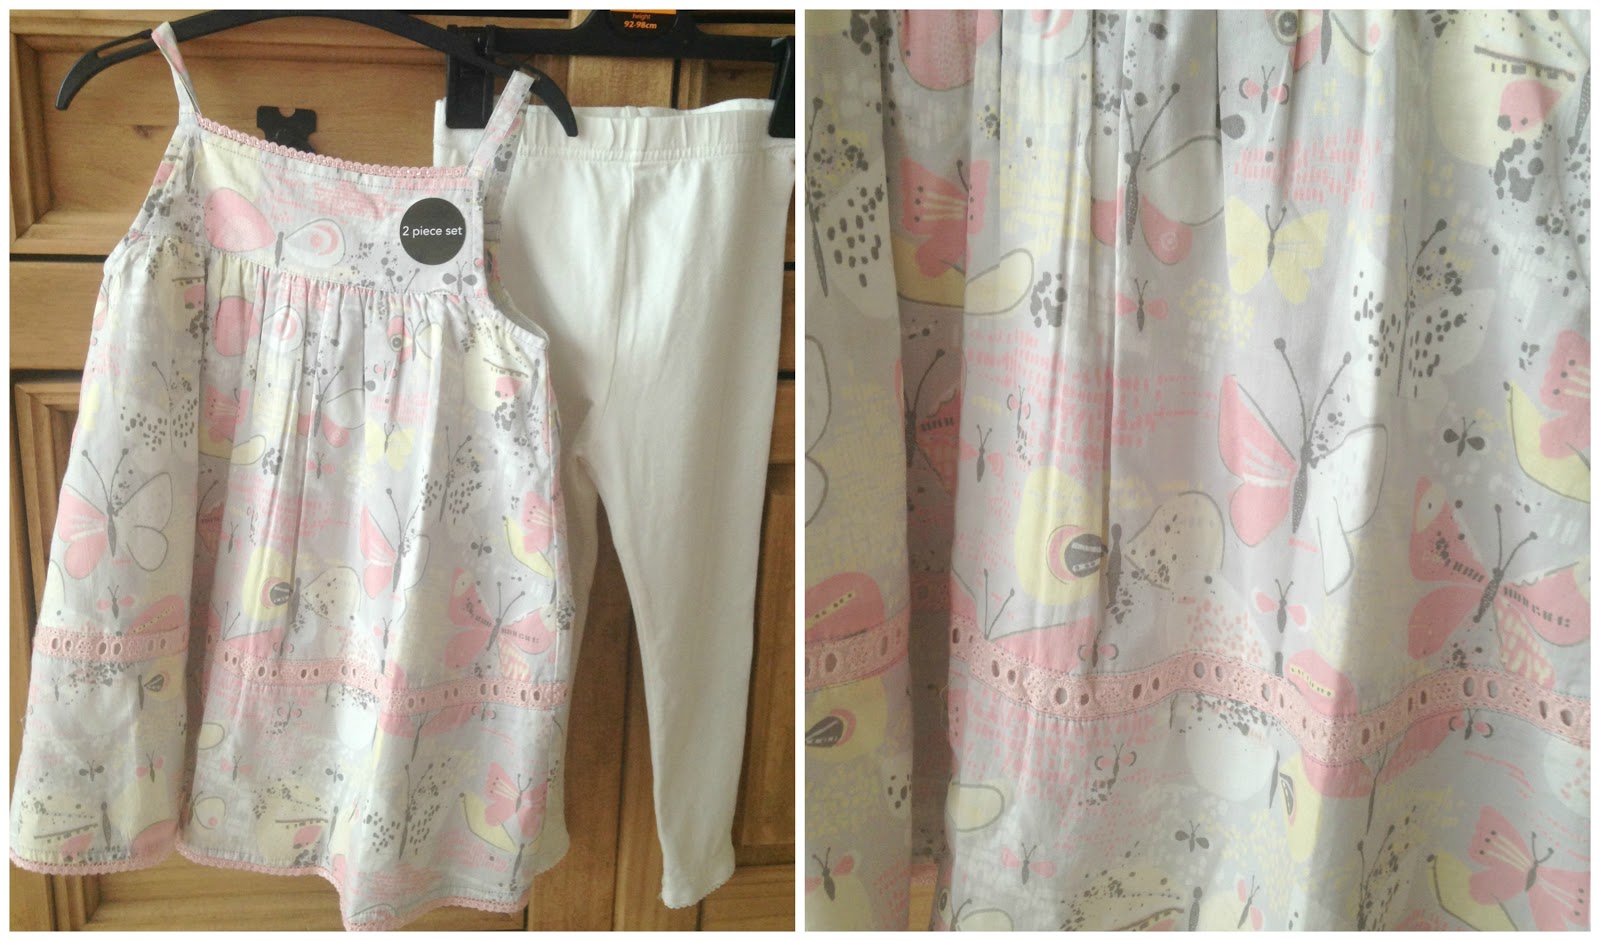 Sienna's clothing haul from Asda!